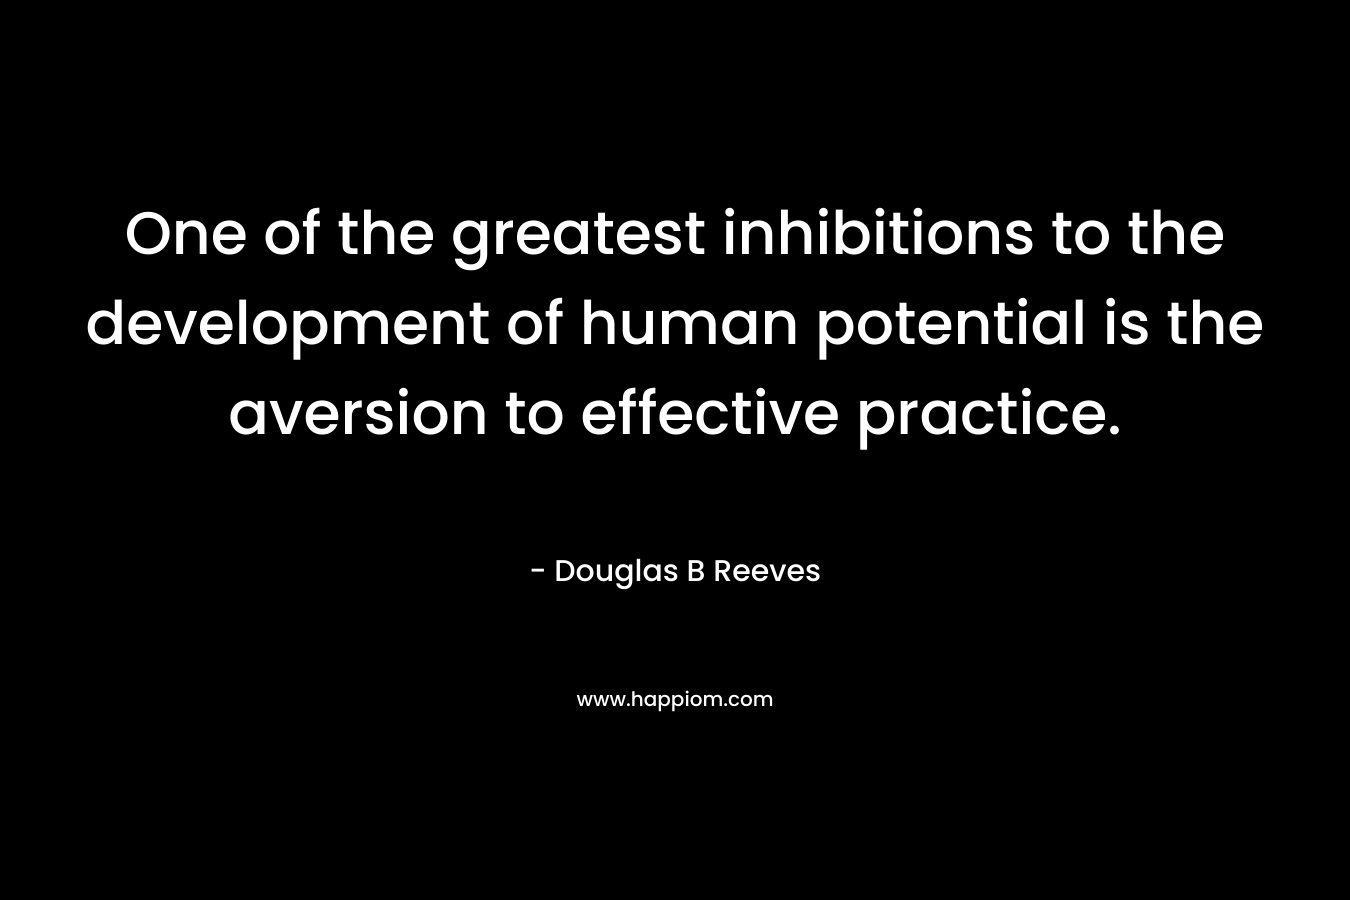 One of the greatest inhibitions to the development of human potential is the aversion to effective practice.